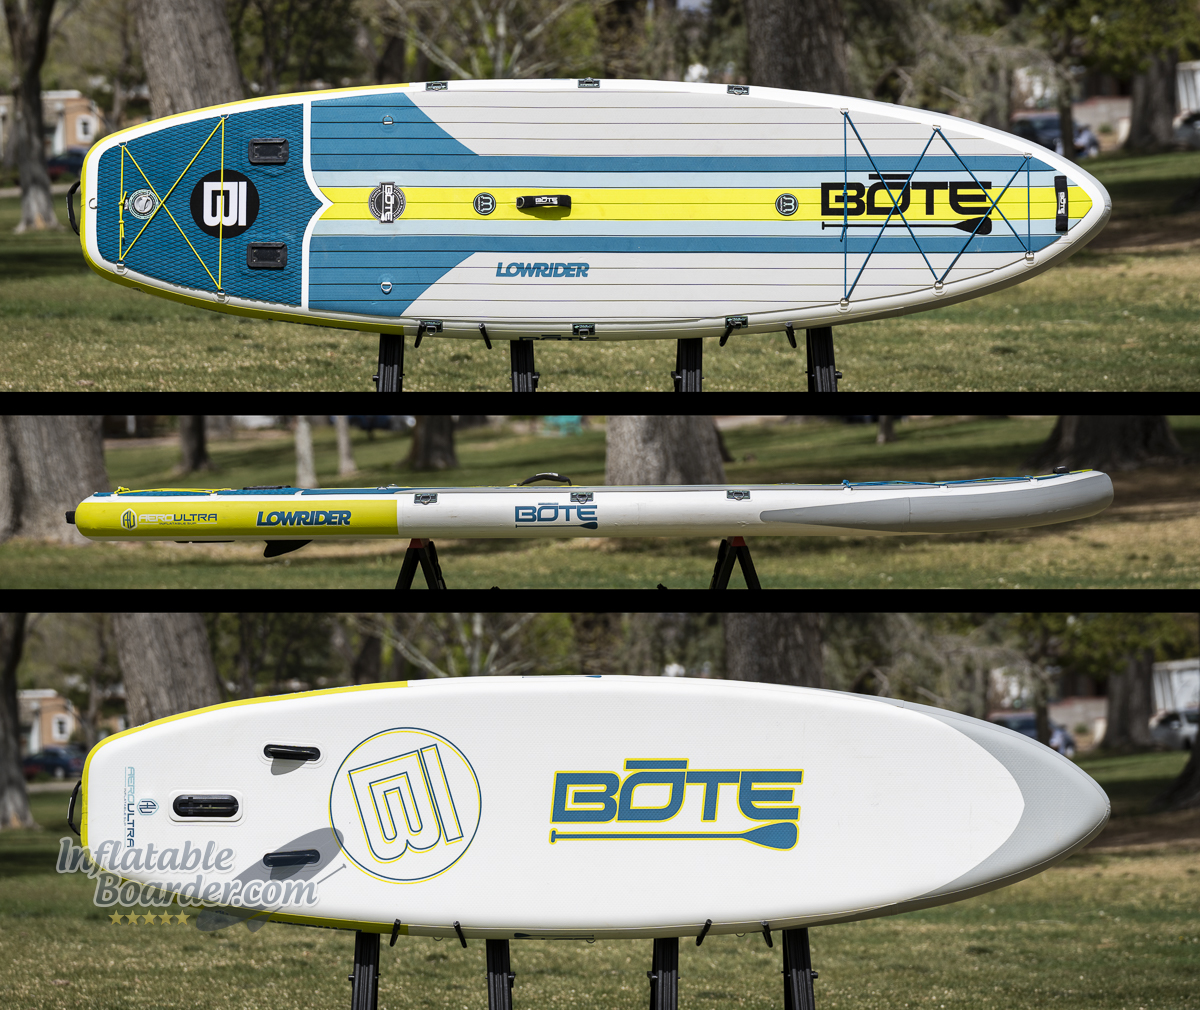 Bote LowRider 11’6  size and shape